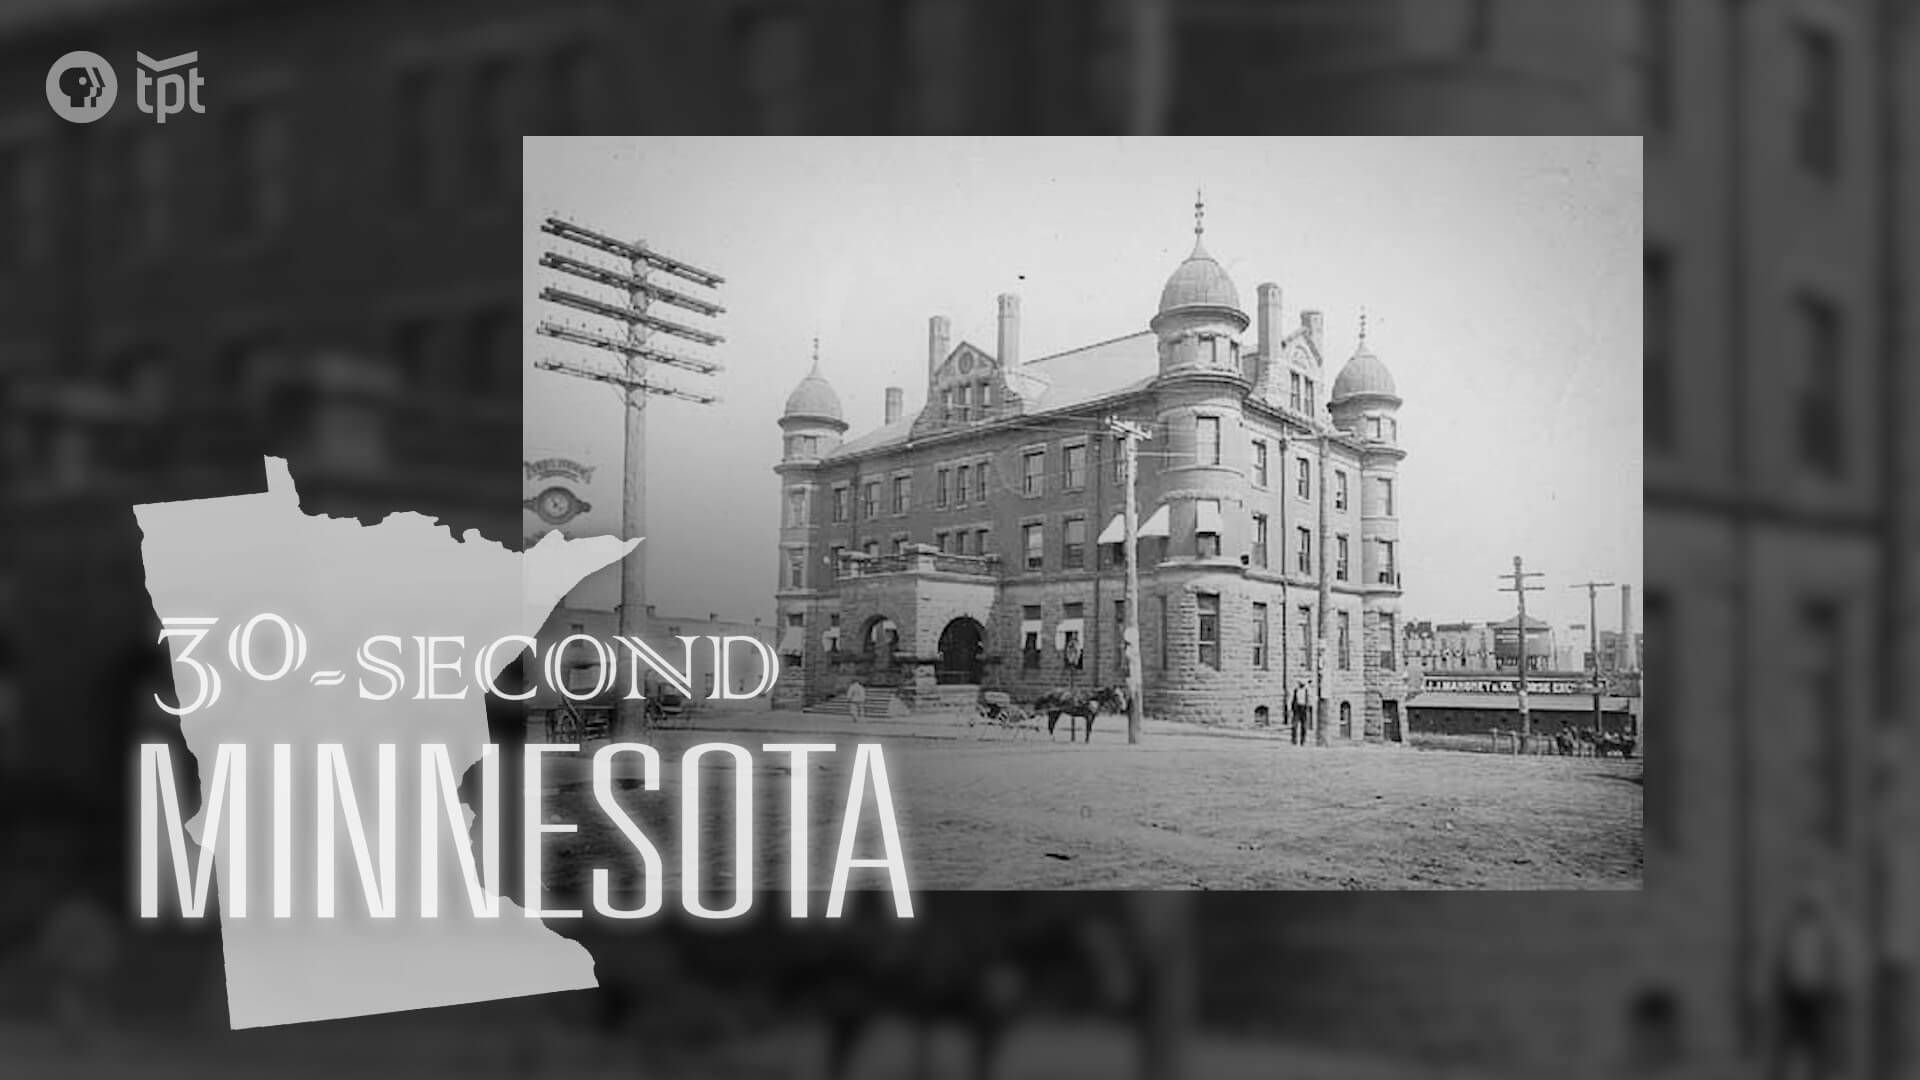 30-Second Minnesota: From Stockyard Offices to Weddings